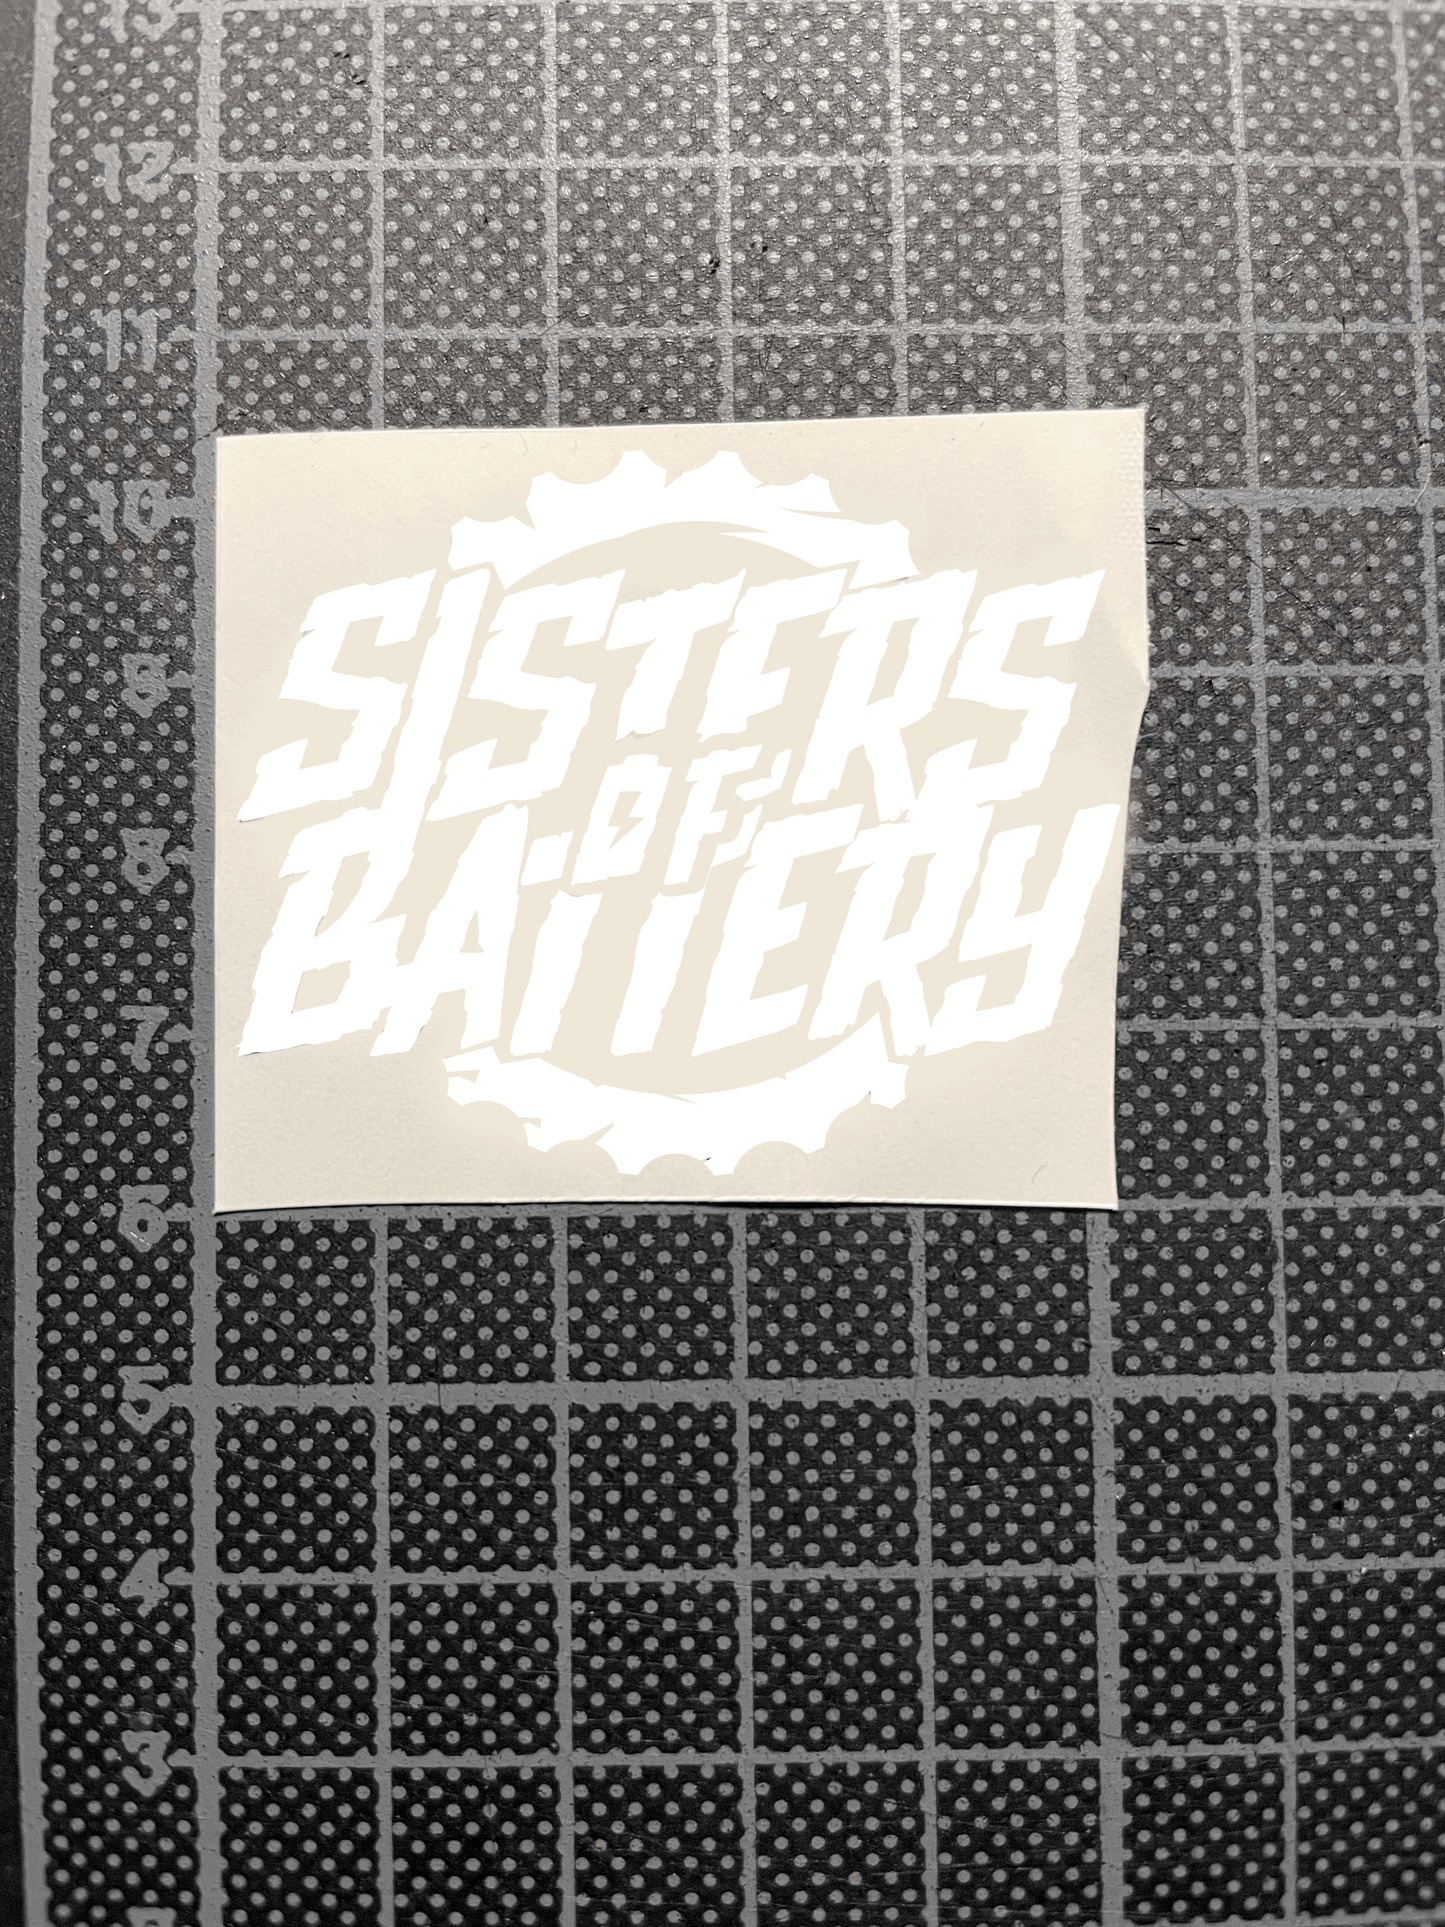 Sisters of Battery - Signature Folie - Sons of Battery® - E-MTB Brand & Community